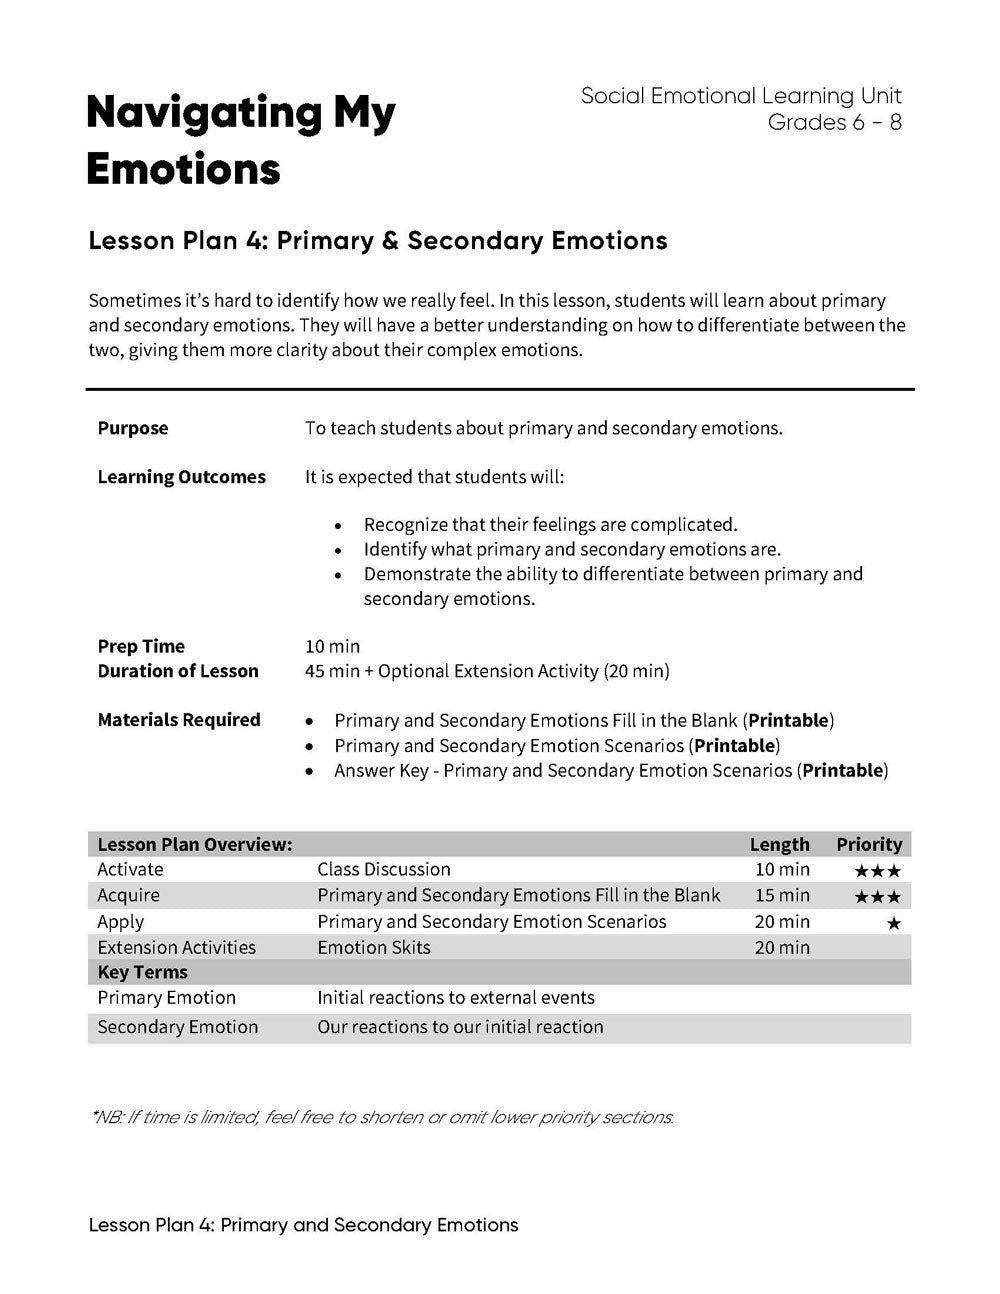 Lesson Plan 4: Primary & Secondary Emotions